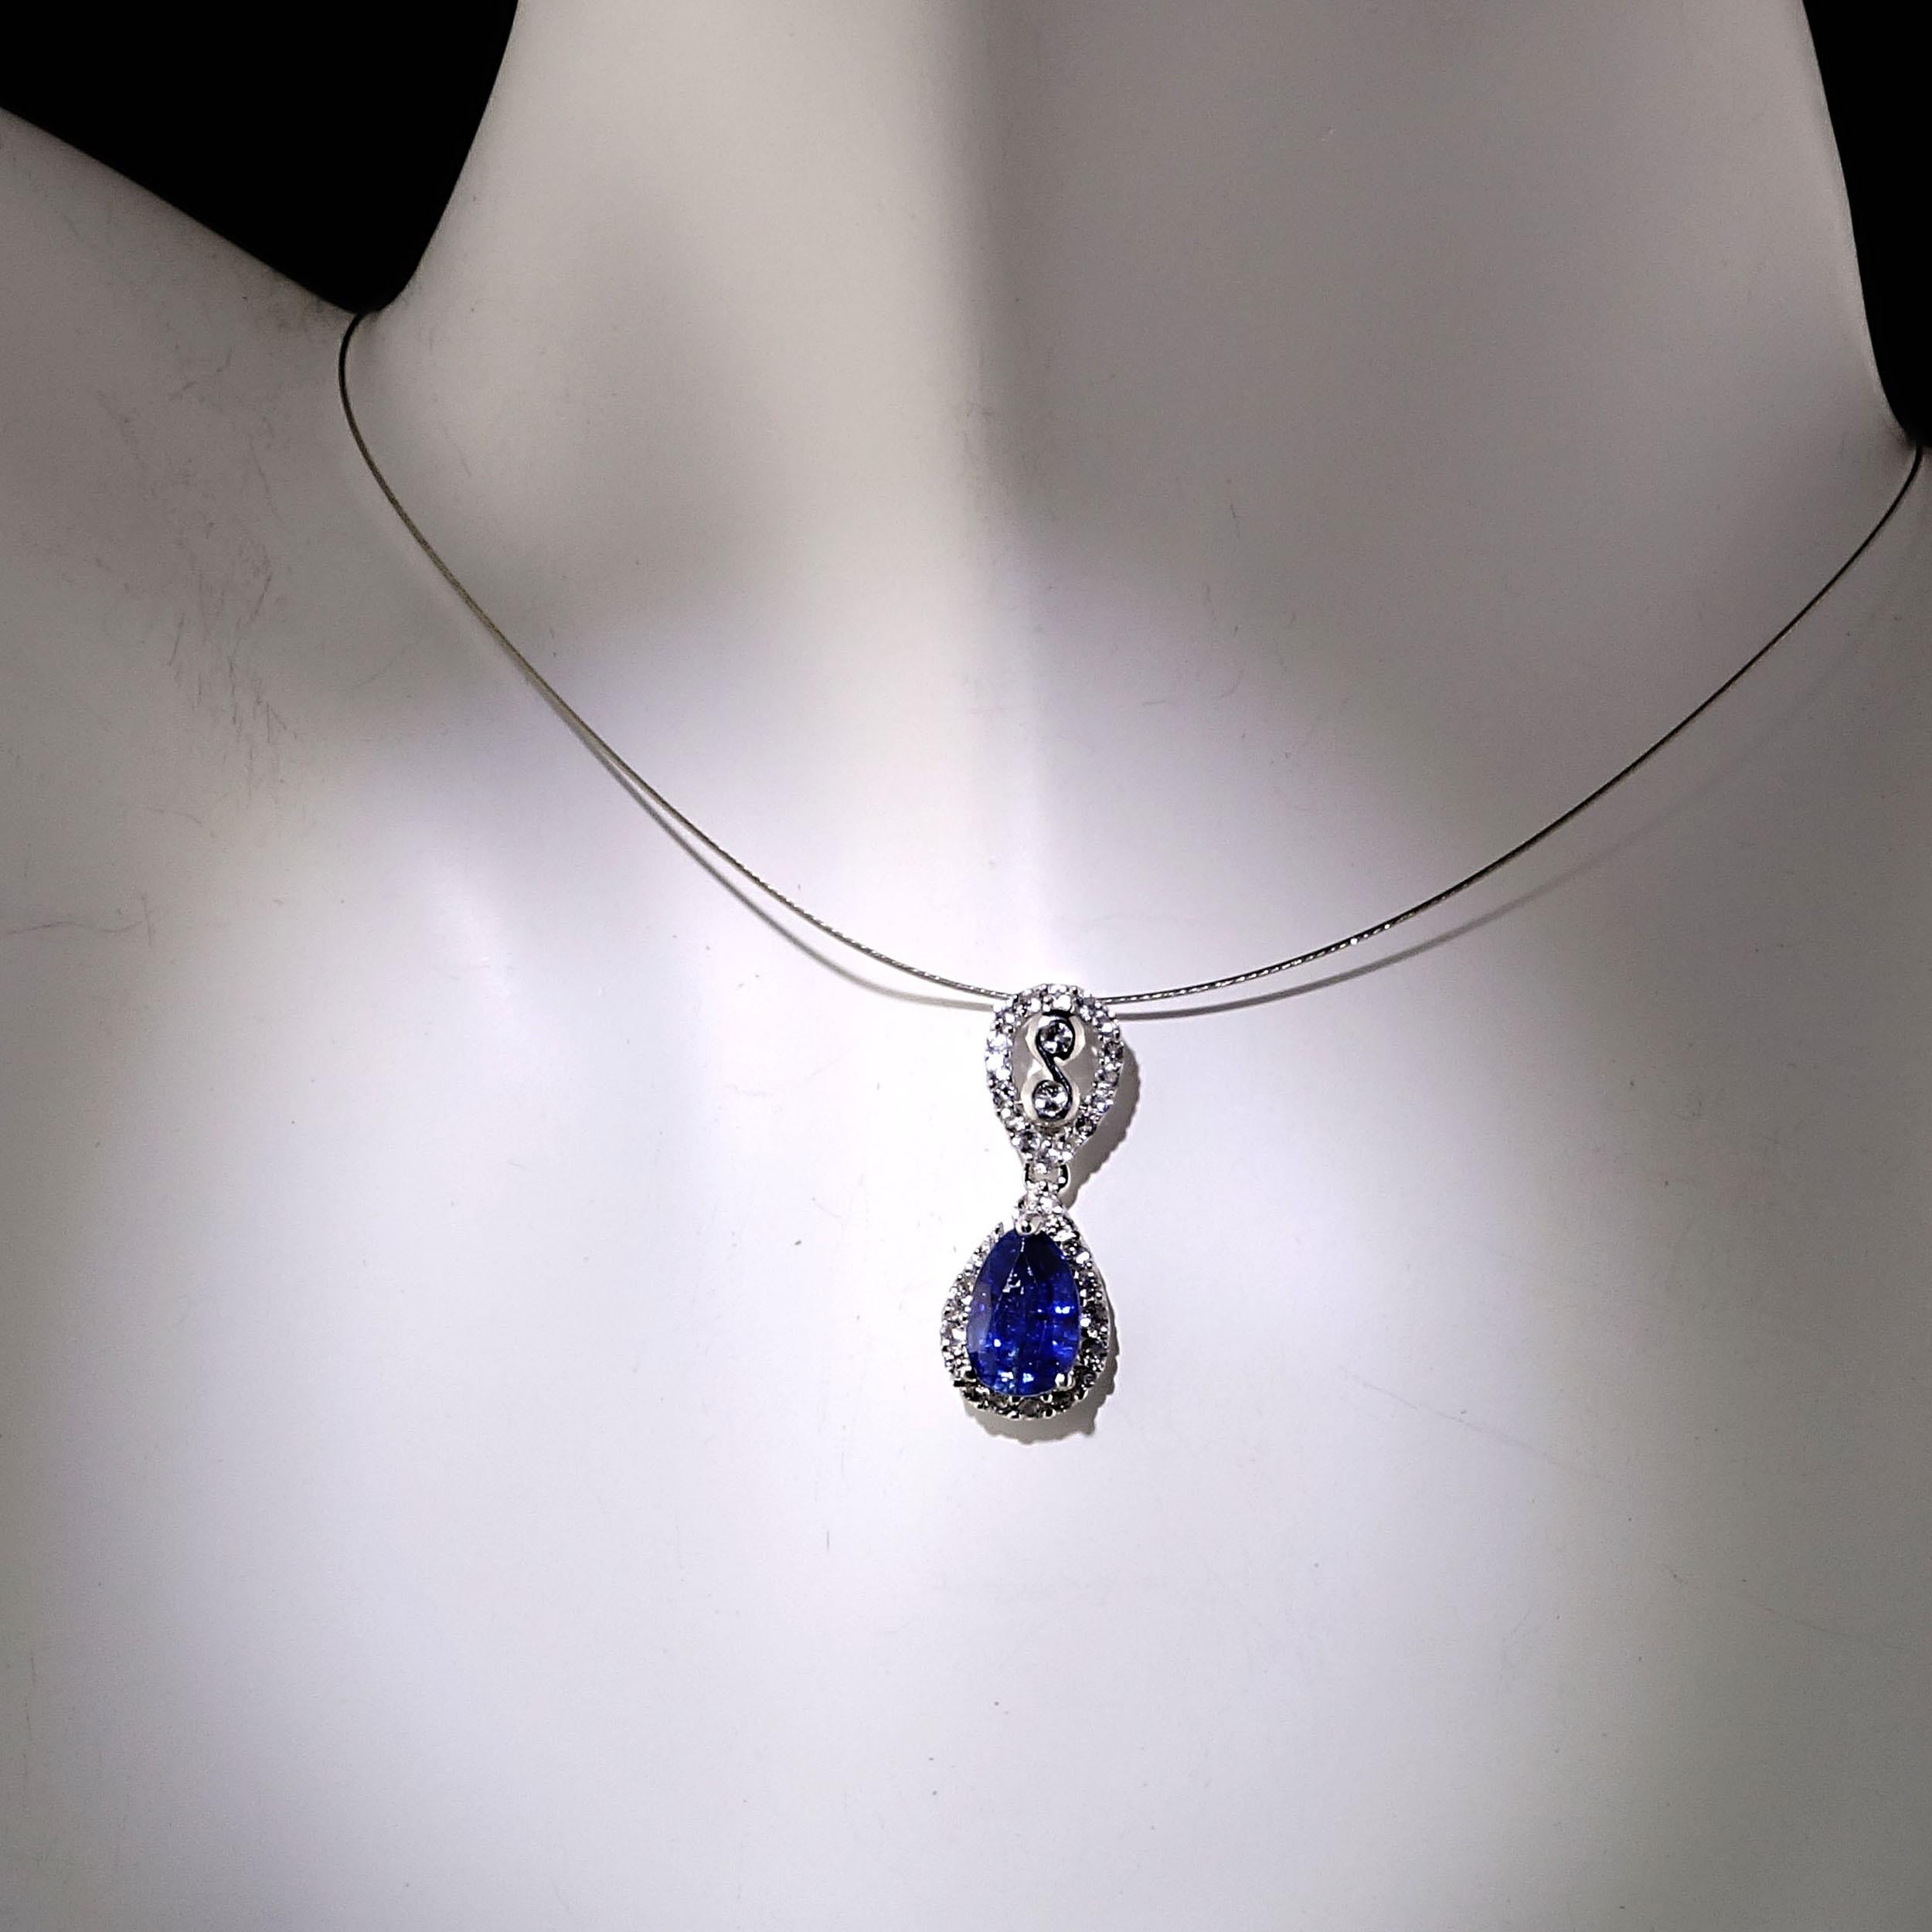 Unique pendant with pear shape faceted blue Kyanite (2ct) which is seated in the lower part of two Sterling Silver pear shapes.  Each piece features sparkling white topaz (.38ct).  This one of a kind pendant is 15/16 inches in length.  Wear this